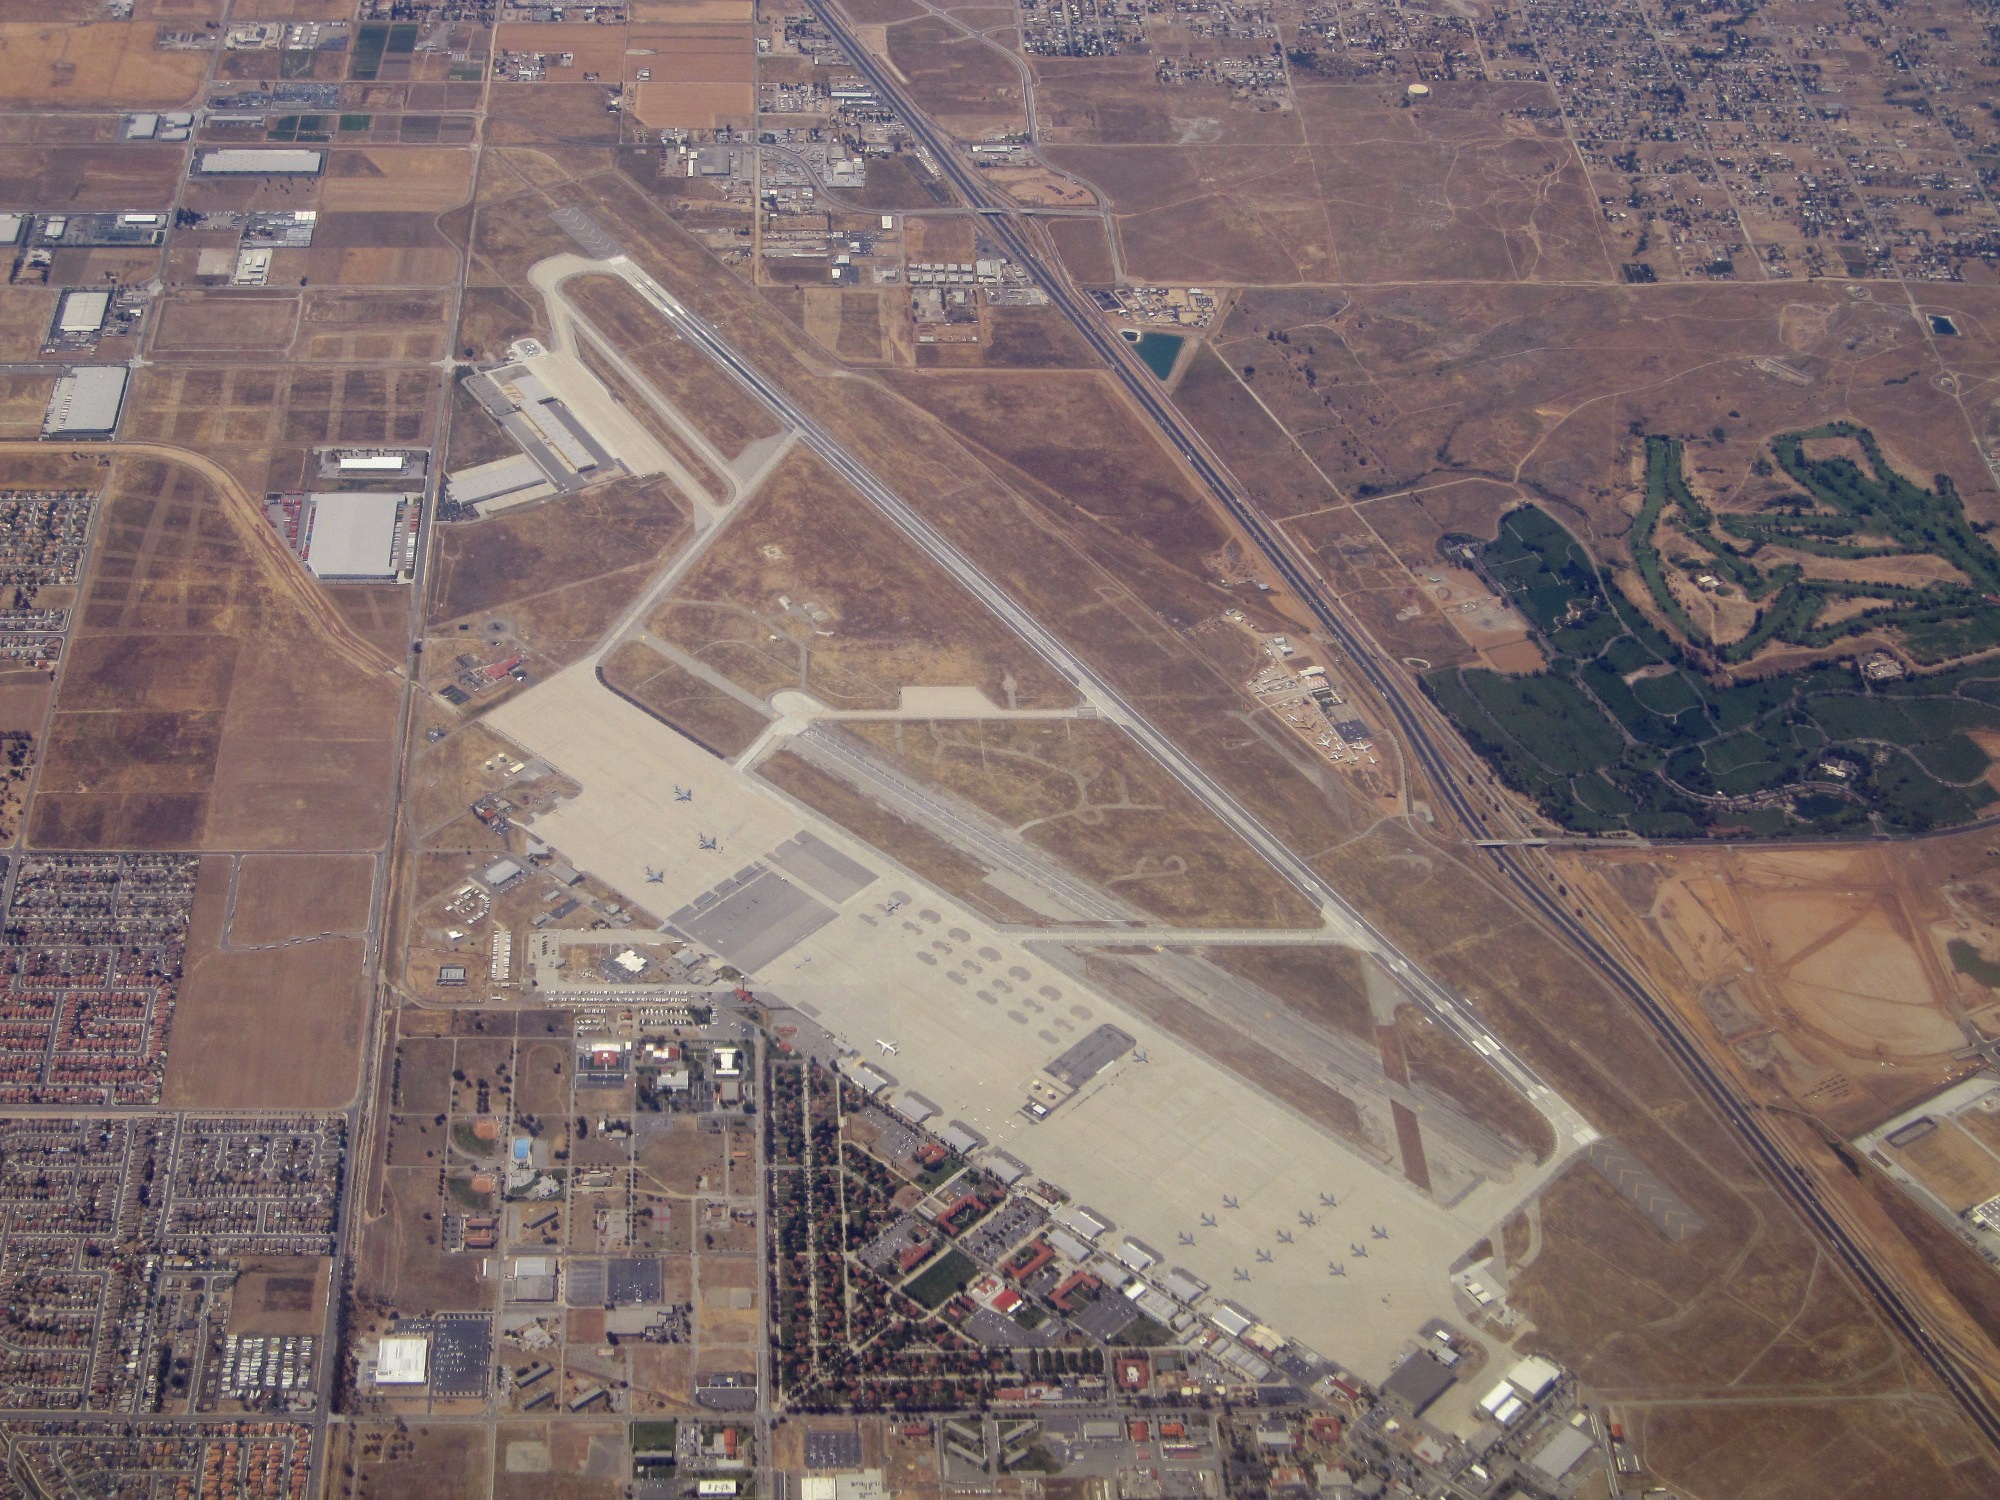 March Air Force Base Aerial Photo | SkyVector